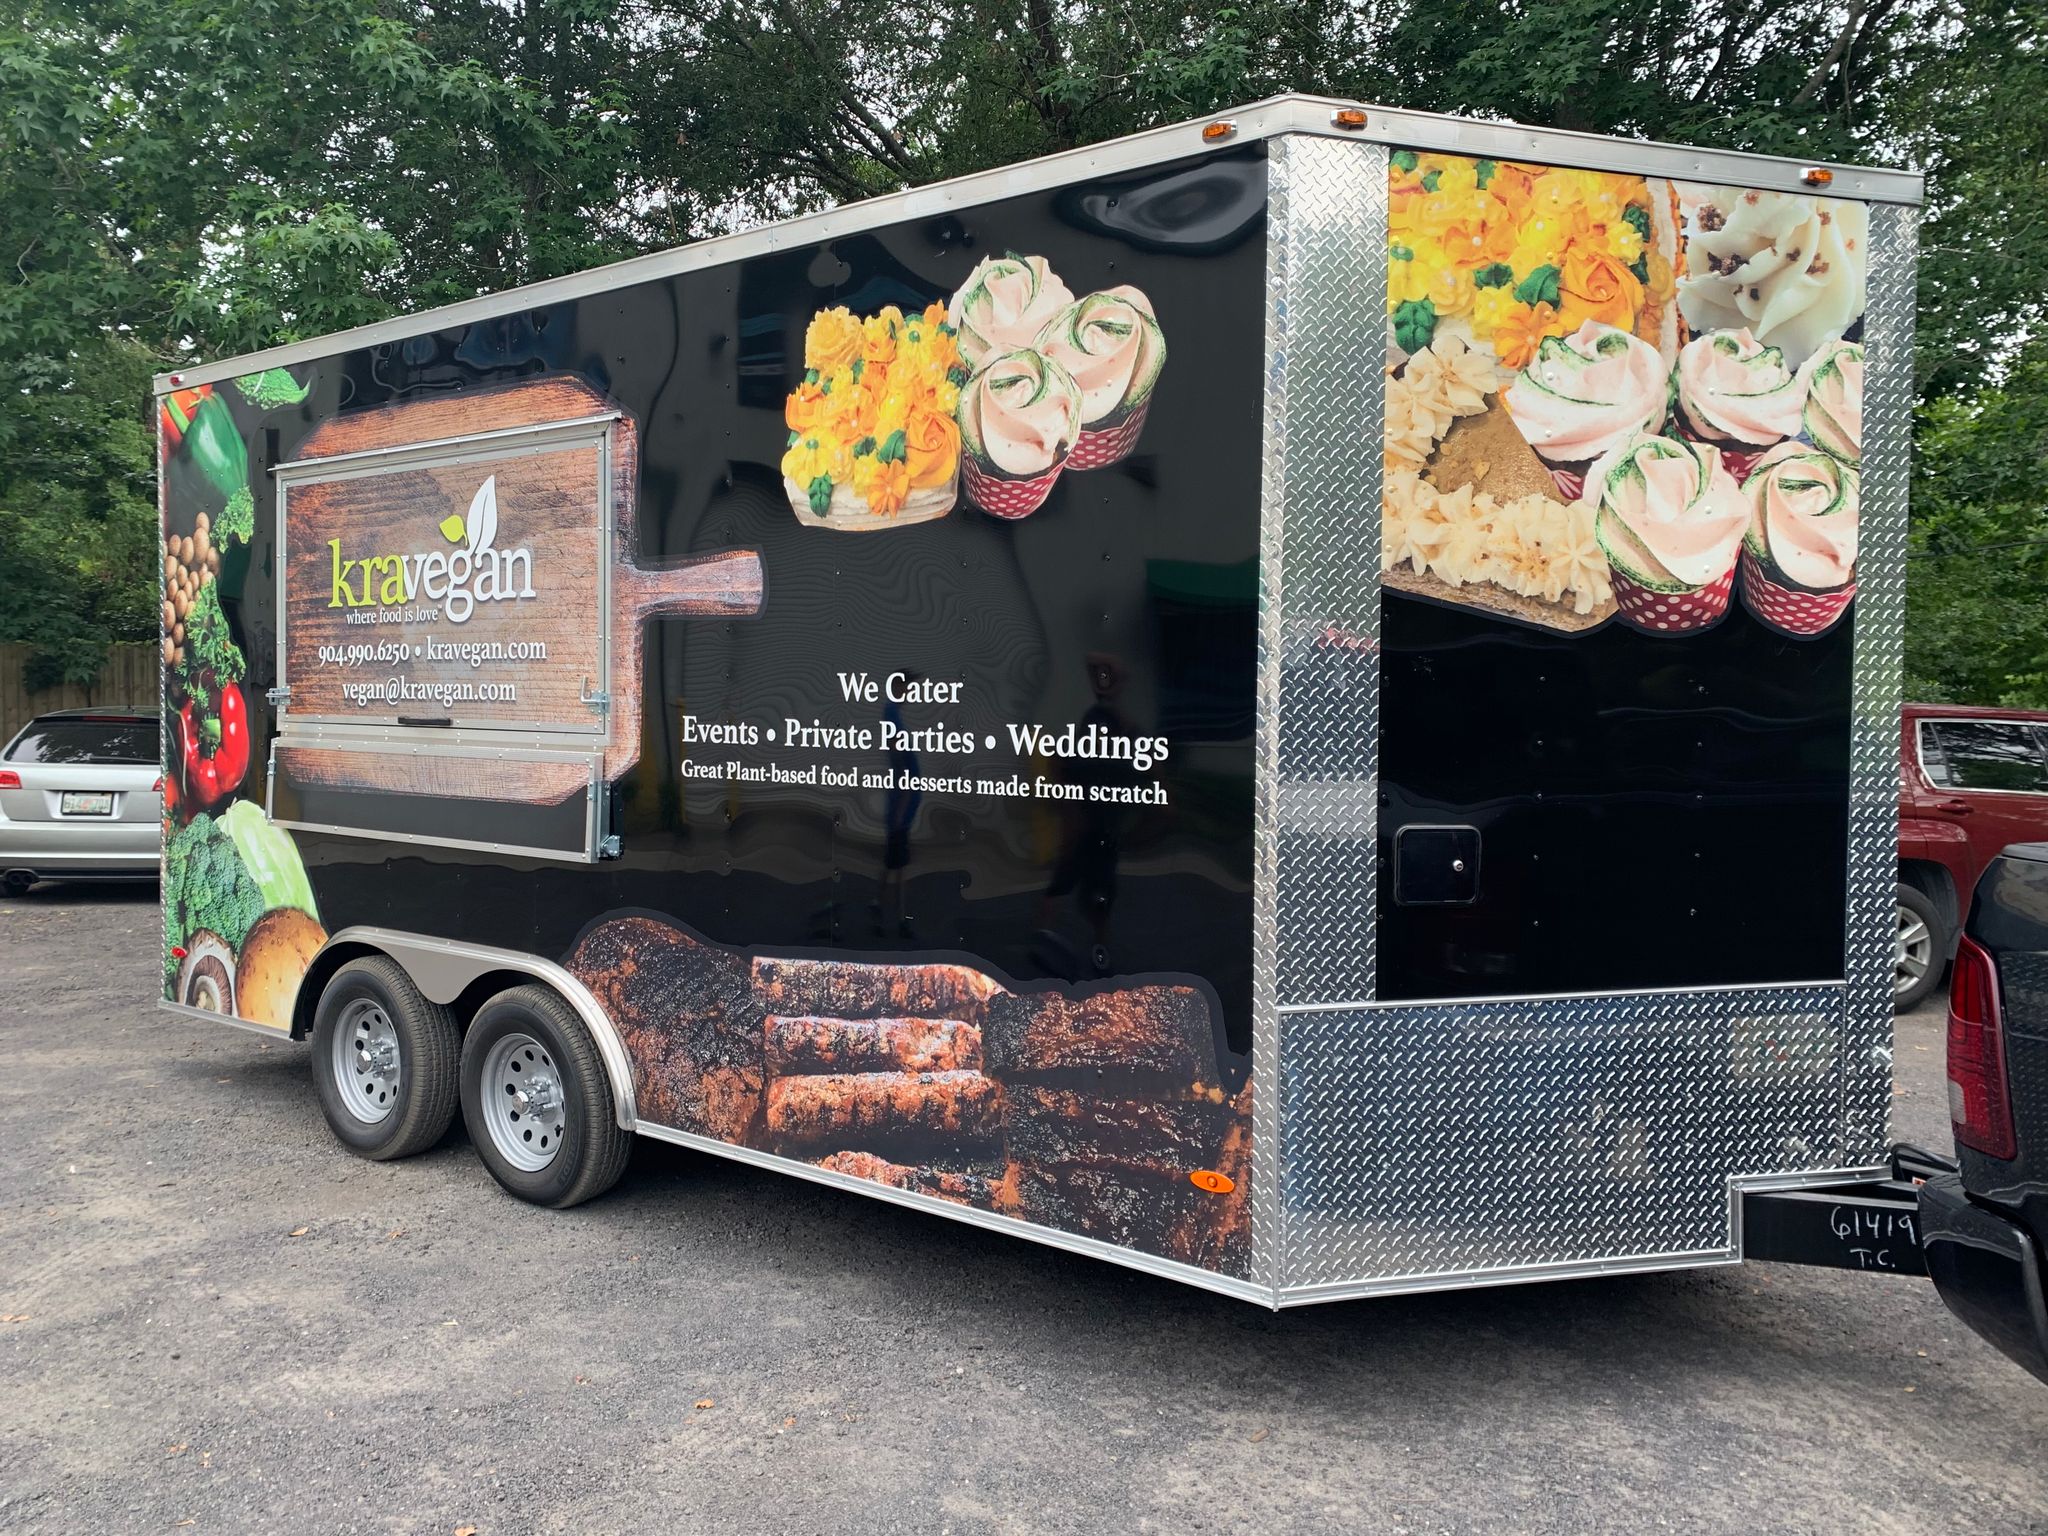 Large commercial two-wheel vegan food truck trailer, wrapped in a custom print glossy black vinyl trailer wrap. Personalized "KraVegan" food truck trailer wrap design, installed by Wraps Direct.